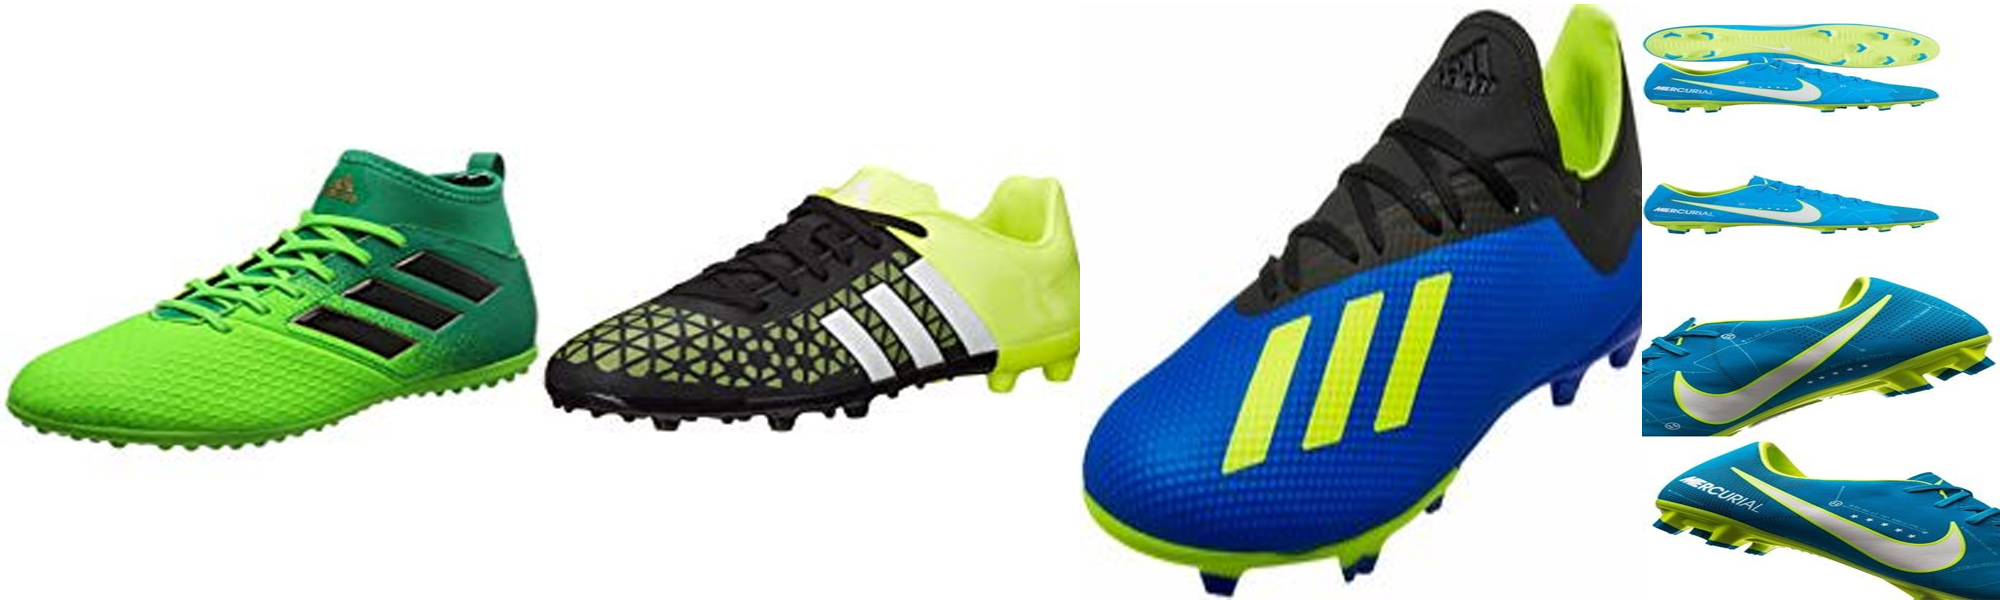 Messi Cleats & Shoes Messi Indoor Soccer Shoes Boys